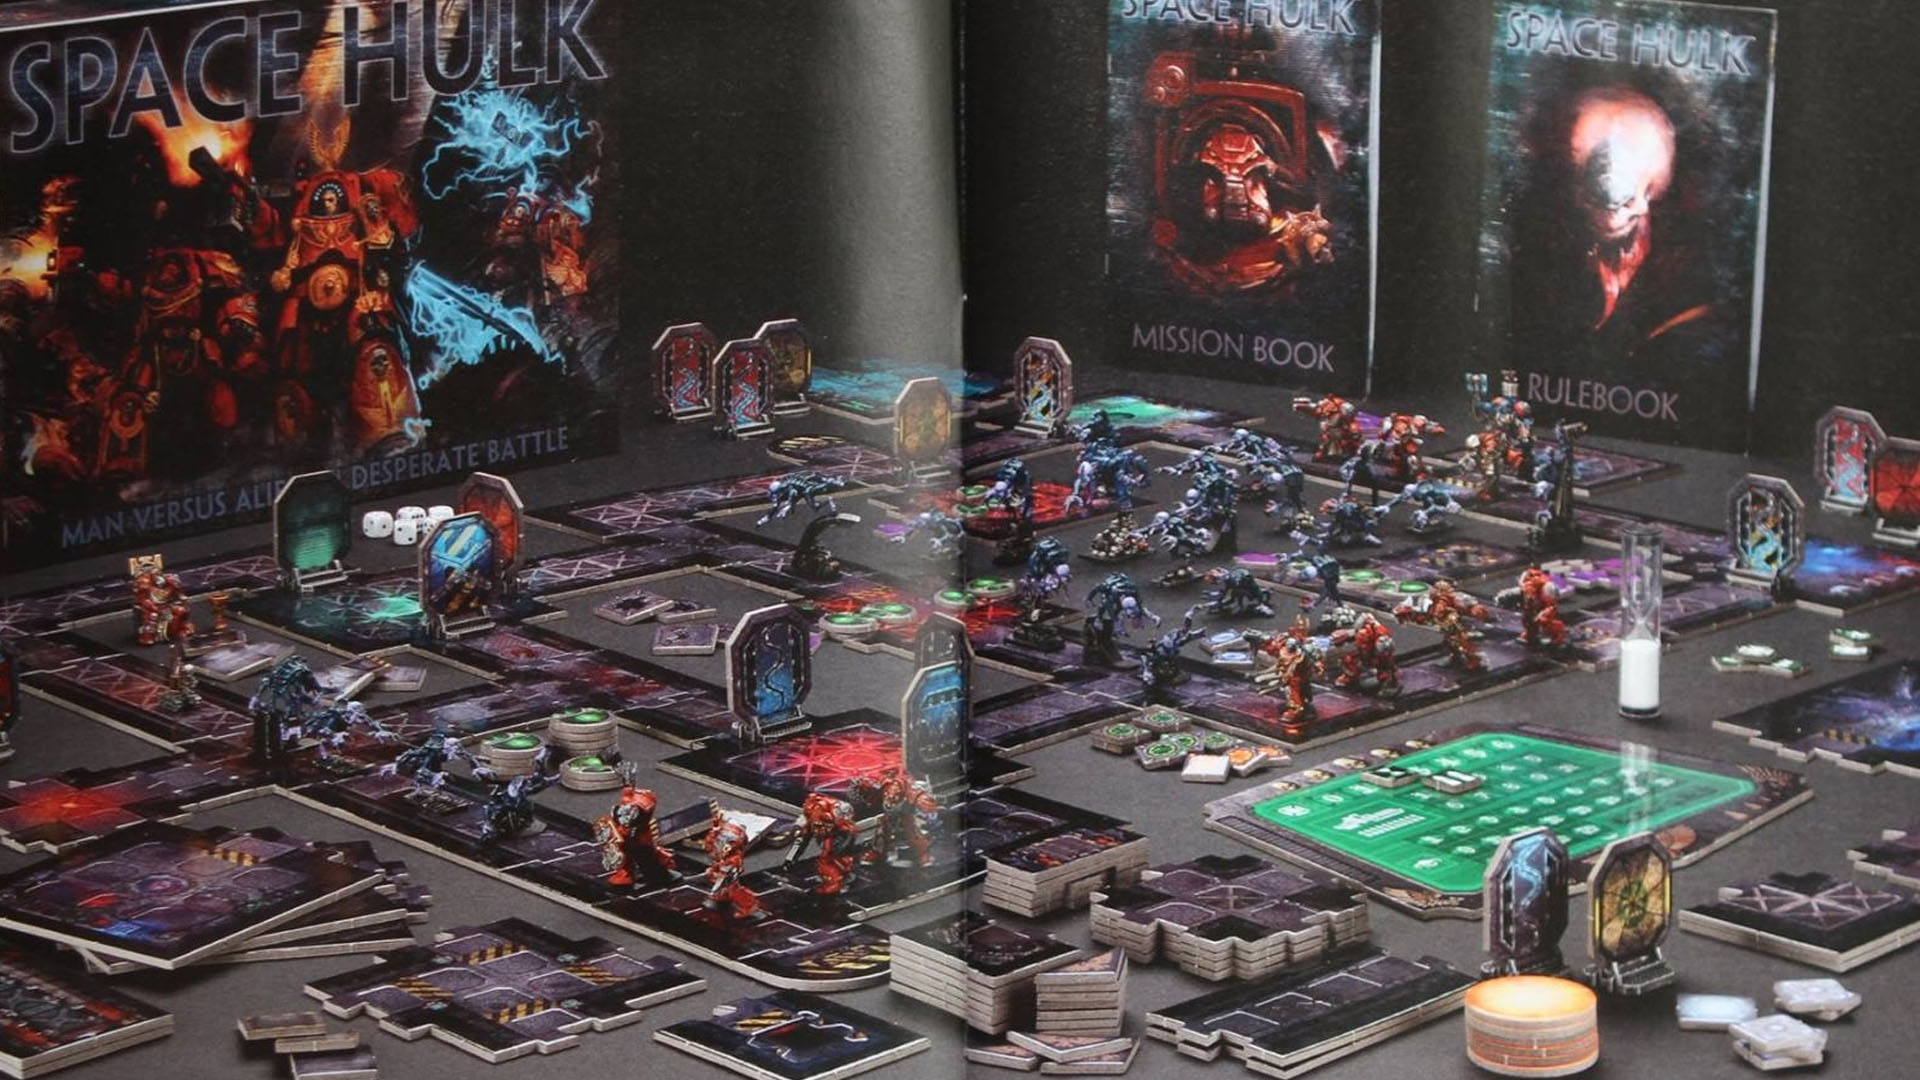 The Space War, Board Game